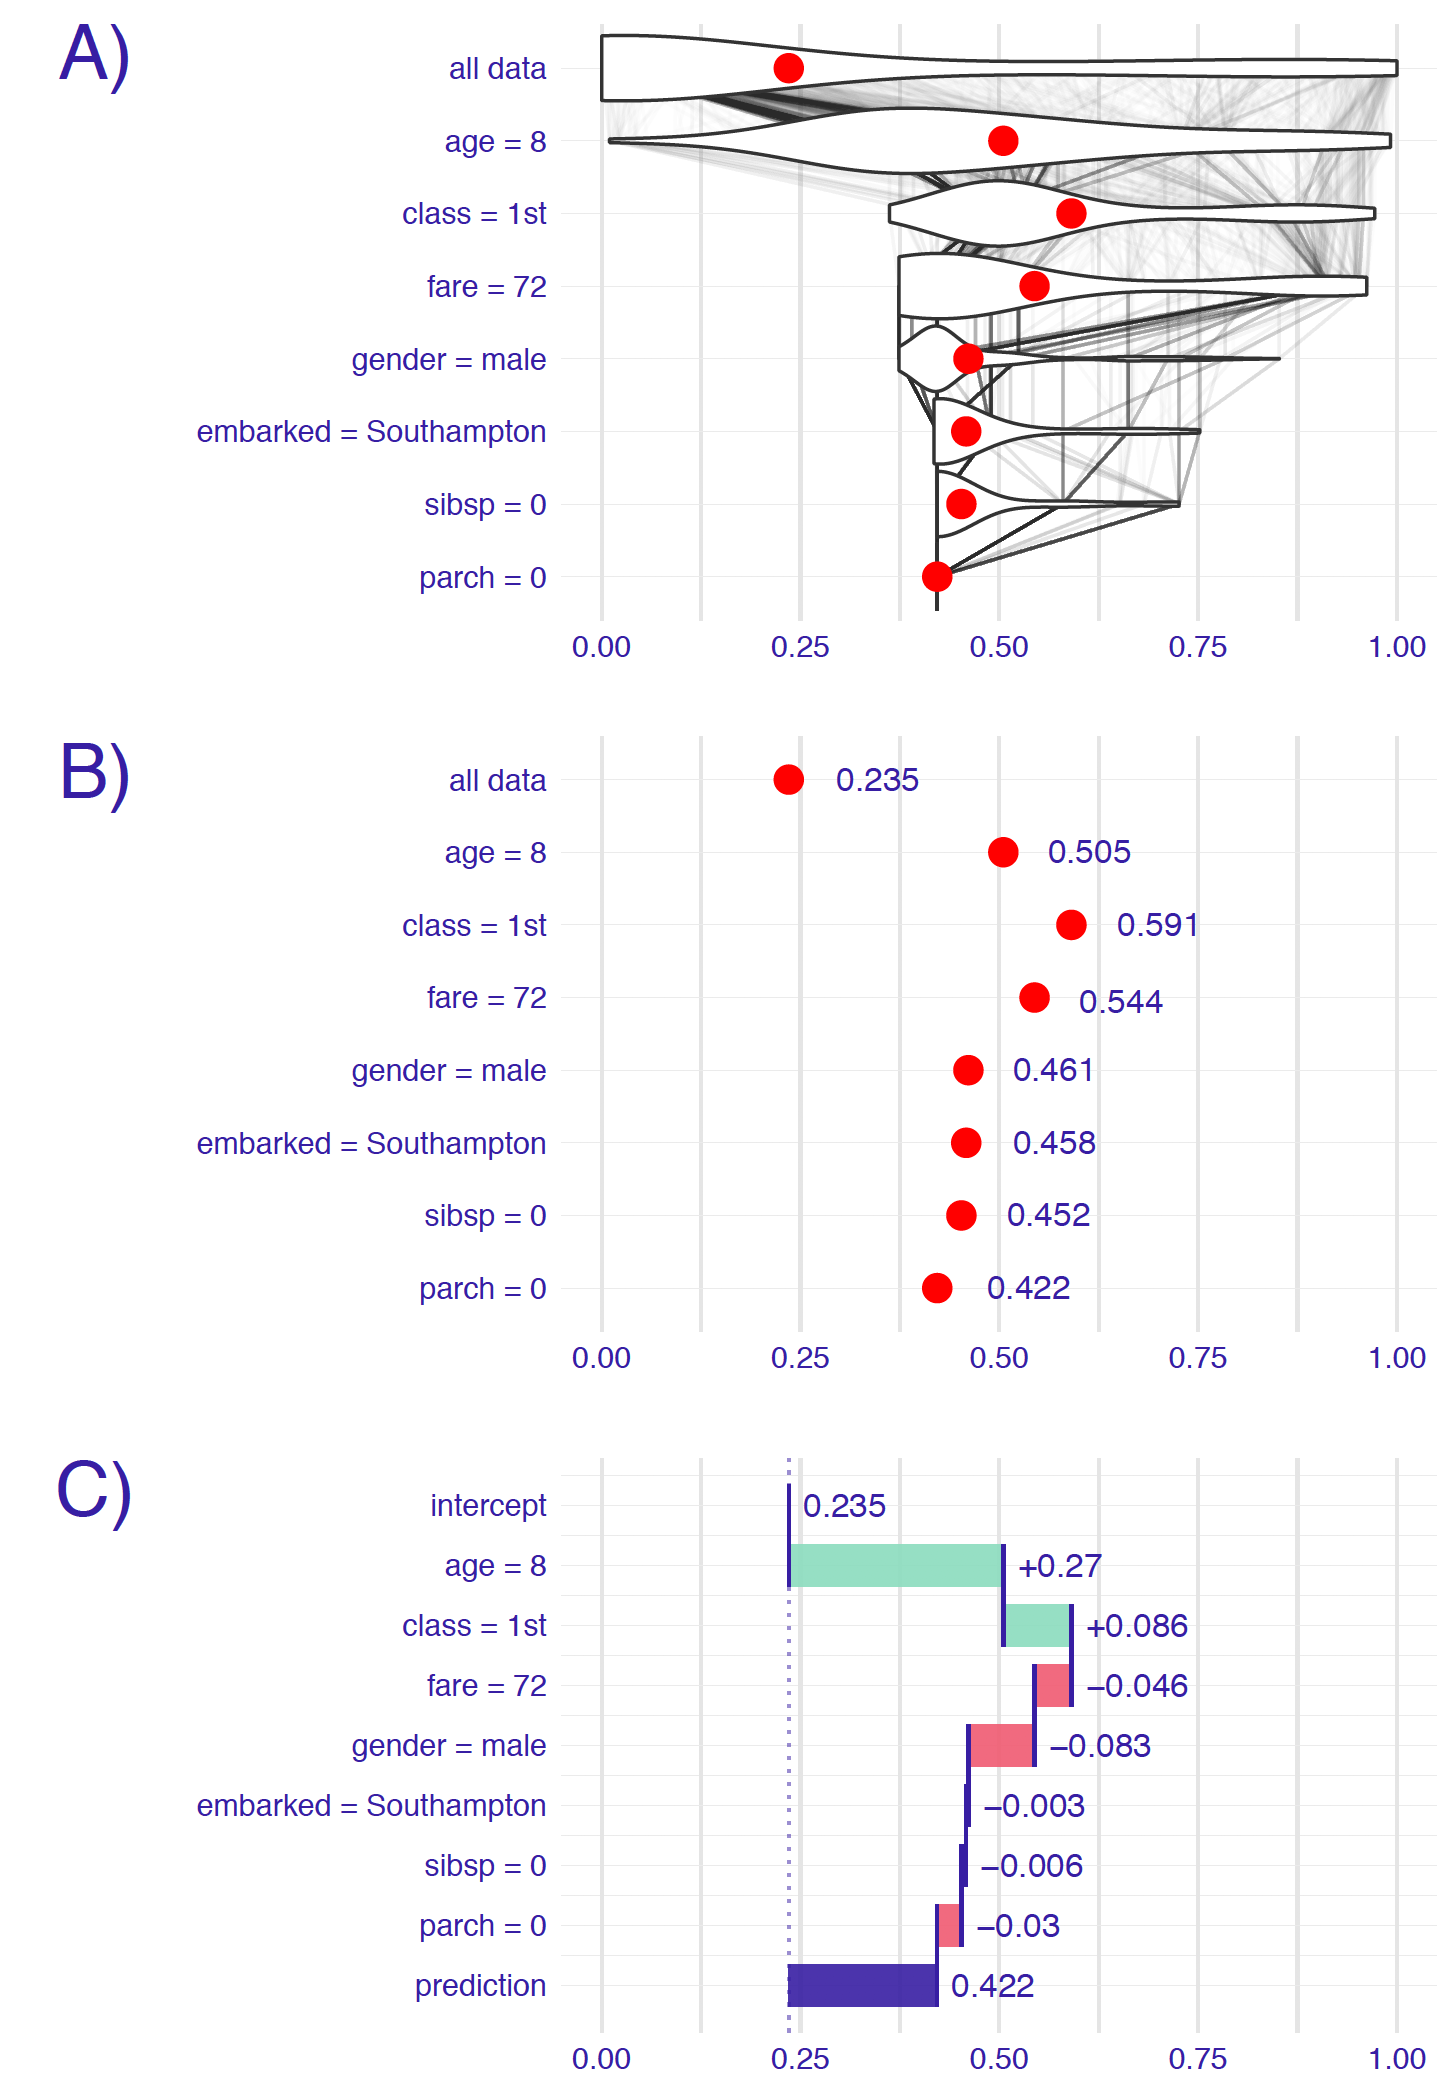 Break-down plots show how the contributions attributed to individual explanatory variables change the mean model’s prediction to yield the actual prediction for a particular single instance (observation). Panel A) The first row shows the distribution and the mean value (red dot) of the model’s predictions for all data. The next rows show the distribution and the mean value of the predictions when fixing values of subsequent explanatory variables. The last row shows the prediction for the particular instance of interest. B) Red dots indicate the mean predictions from panel A. C) The green and red bars indicate, respectively, positive and negative changes in the mean predictions (contributions attributed to explanatory variables).